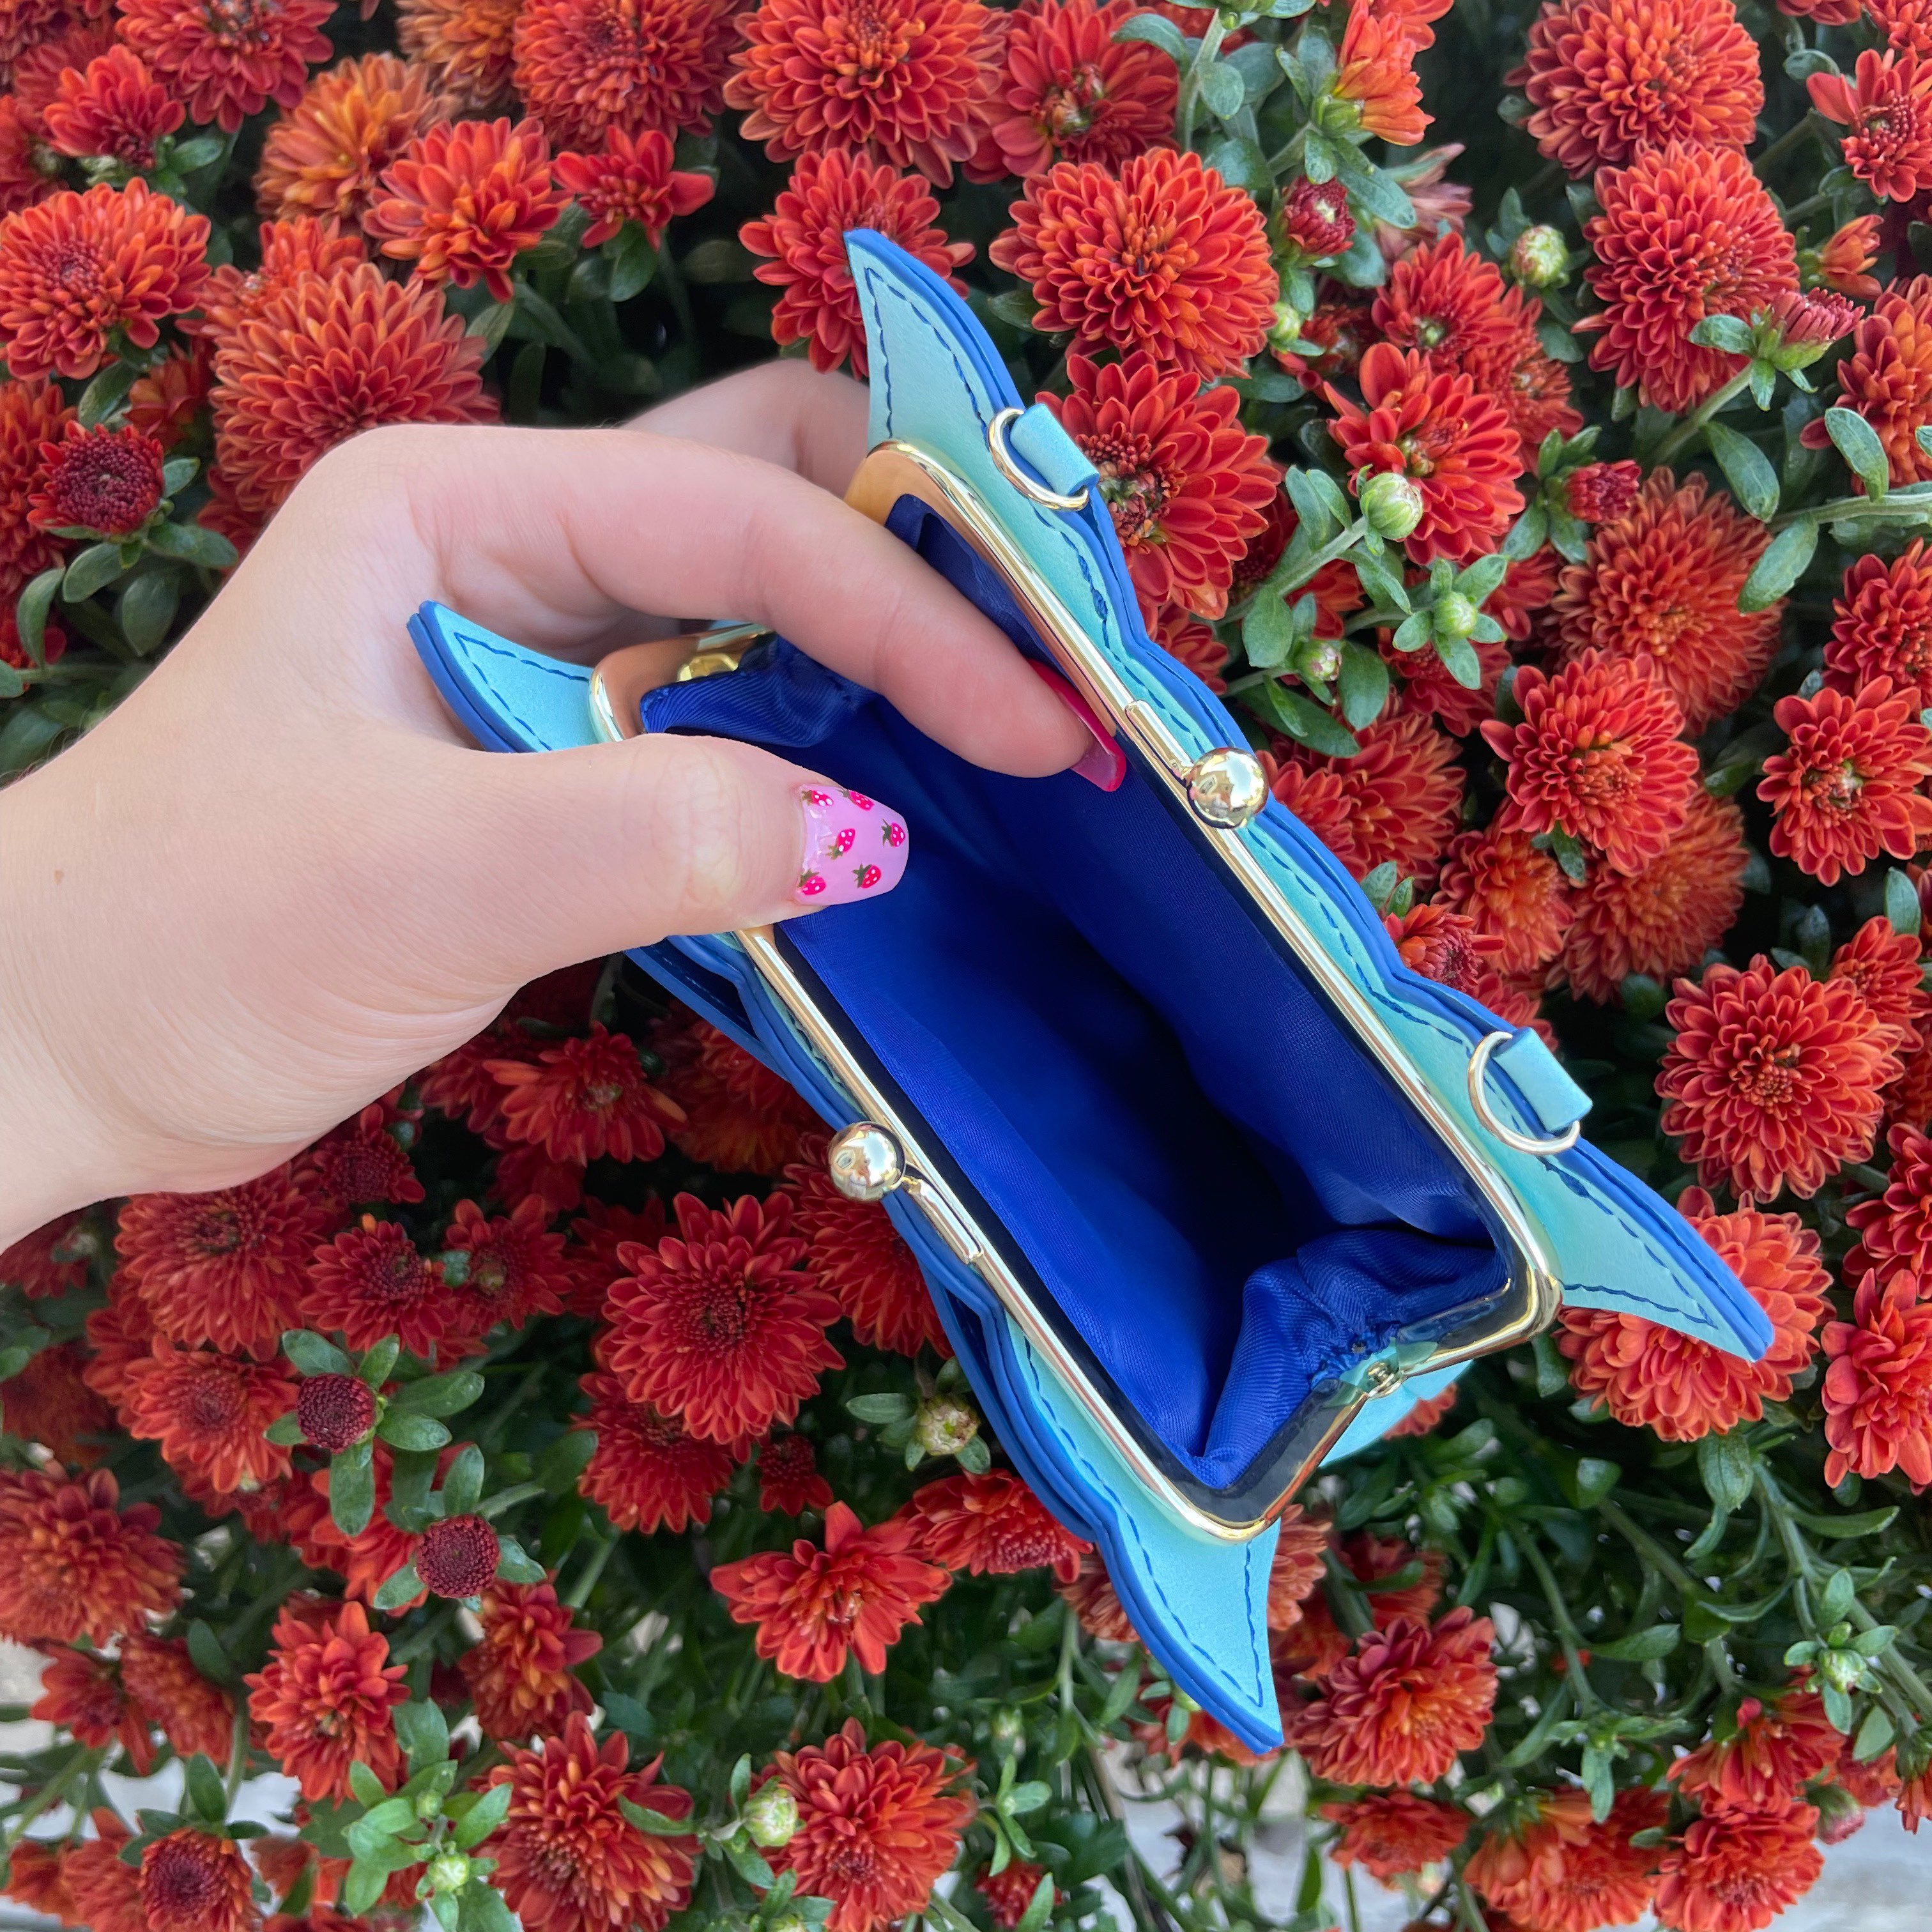 Unboxing Milan Chiva Tote Crossbody Handbags with Coin Purse Top Handle Bags.  This pink and blue color combination is so cute. #milanchiva… | Instagram